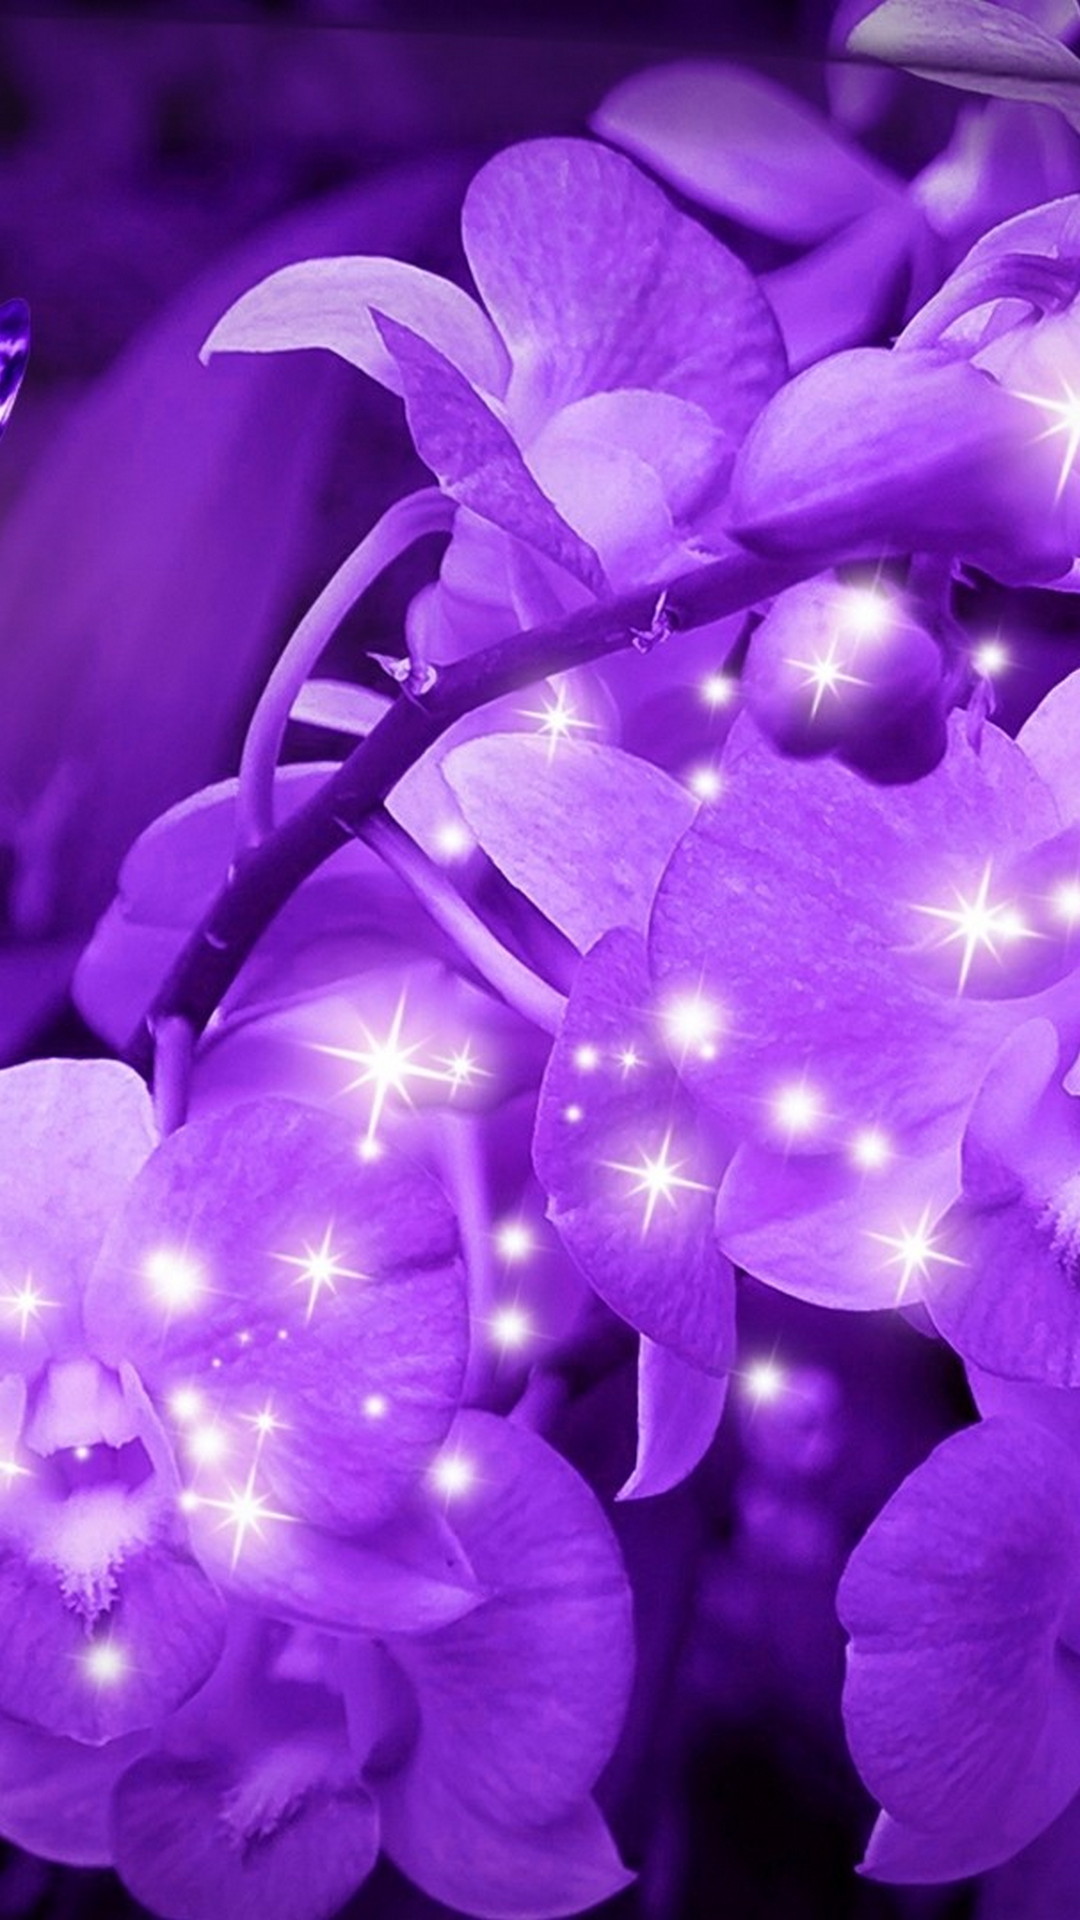 Android Wallpaper Flowers Purple With high-resolution 1080X1920 pixel. You can use this wallpaper for your Android backgrounds, Tablet, Samsung Screensavers, Mobile Phone Lock Screen and another Smartphones device